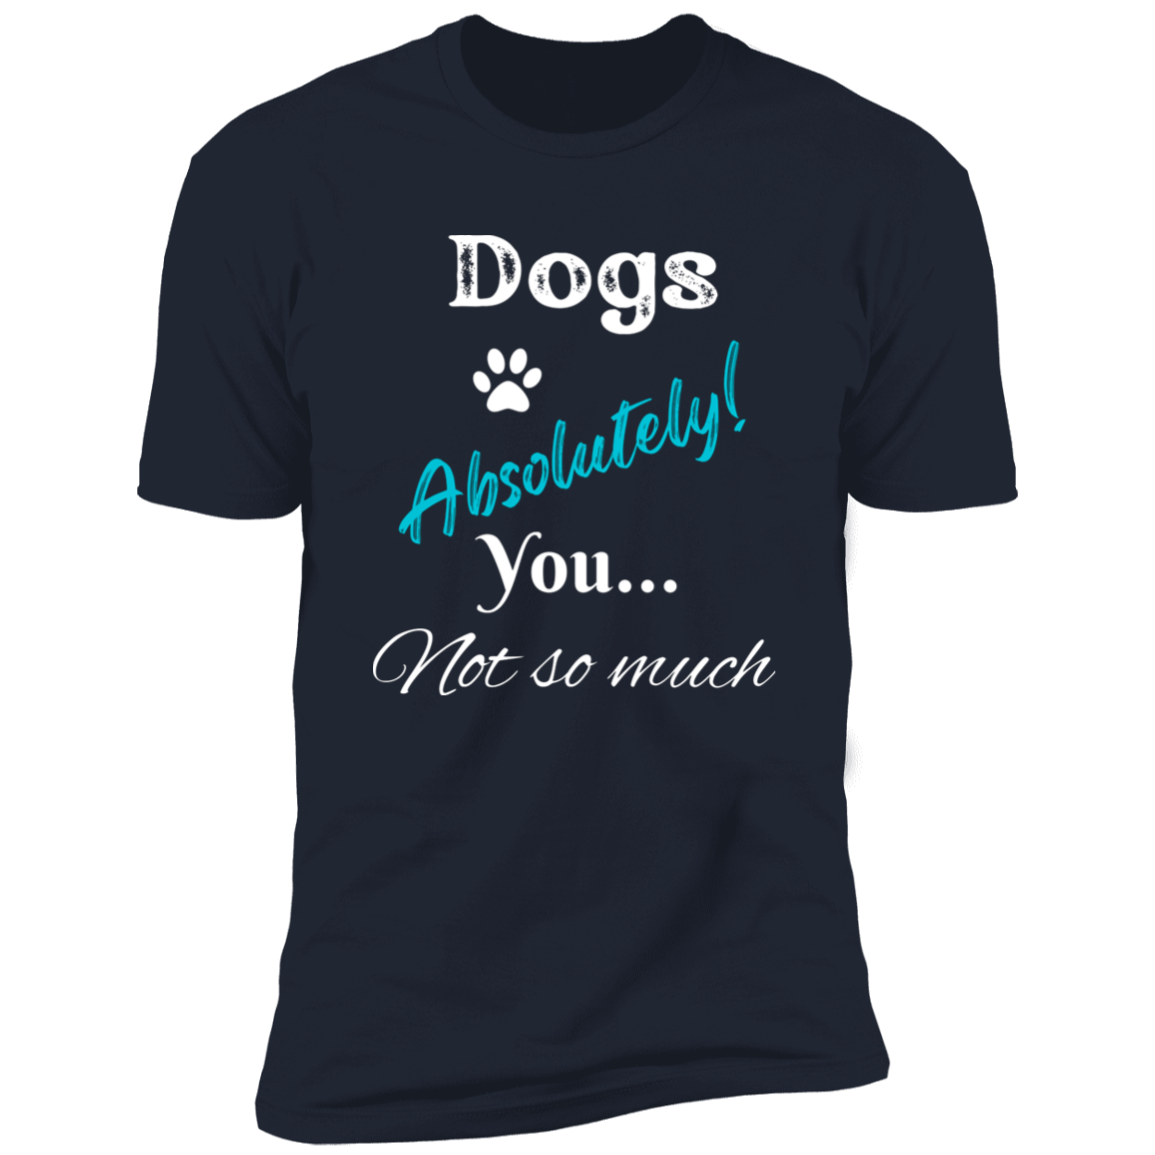 Dogs Absolutely! You Not So Much T-shirt, funny dog shirt dog shirt for humans, in navy blue